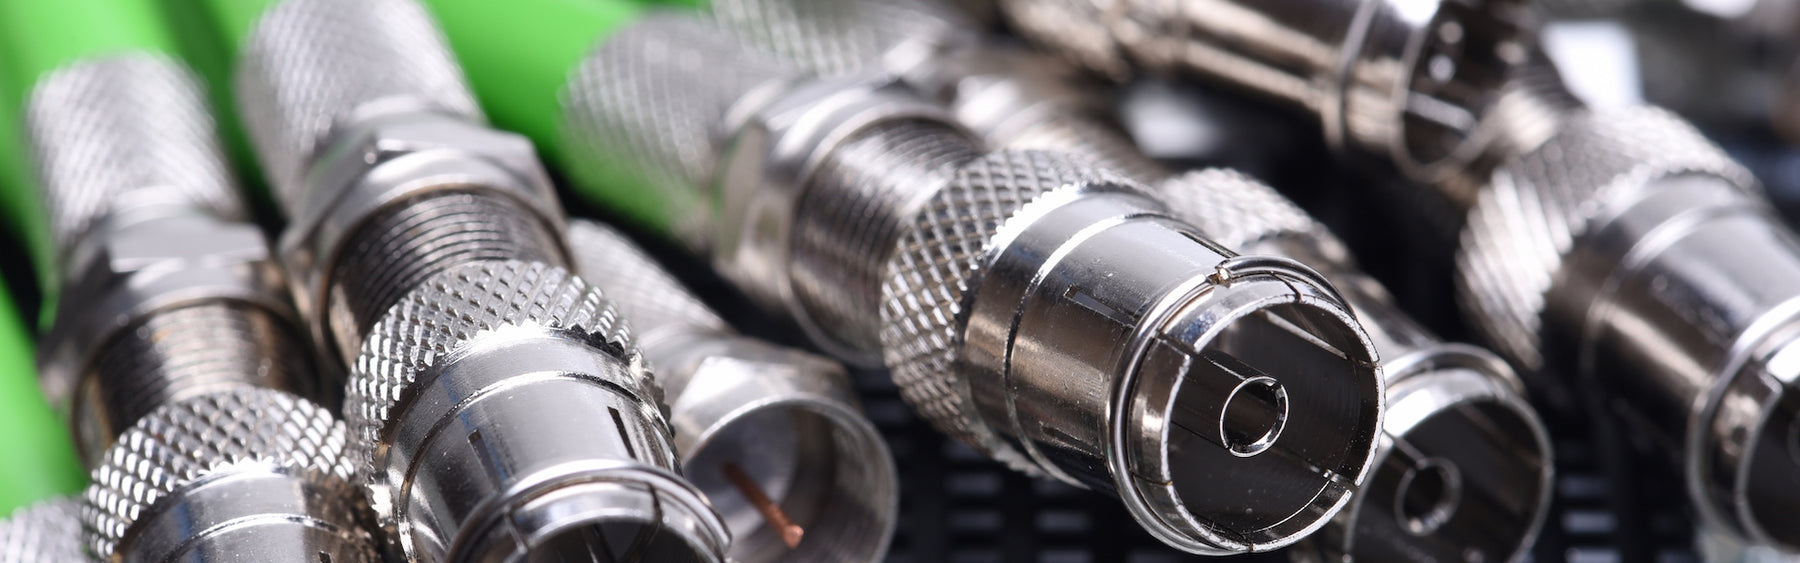 Coaxial Cable: The Different Types and Why You Need Them